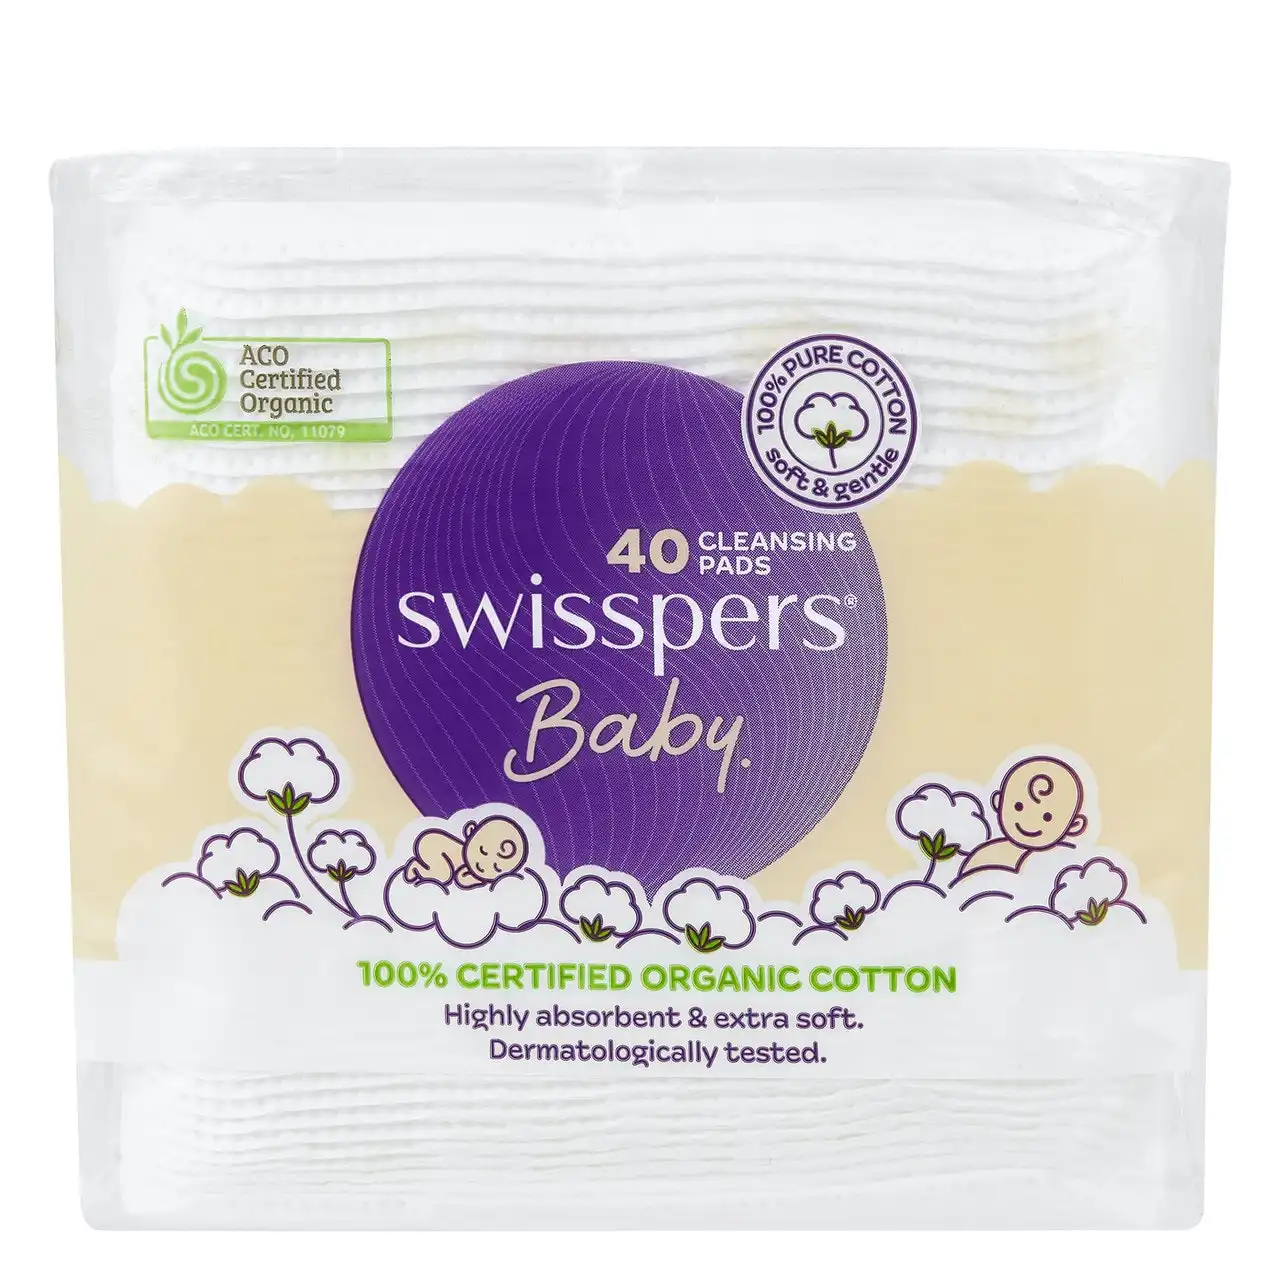 Swisspers Baby Organic Cotton Cleansing Pads 40 Pack